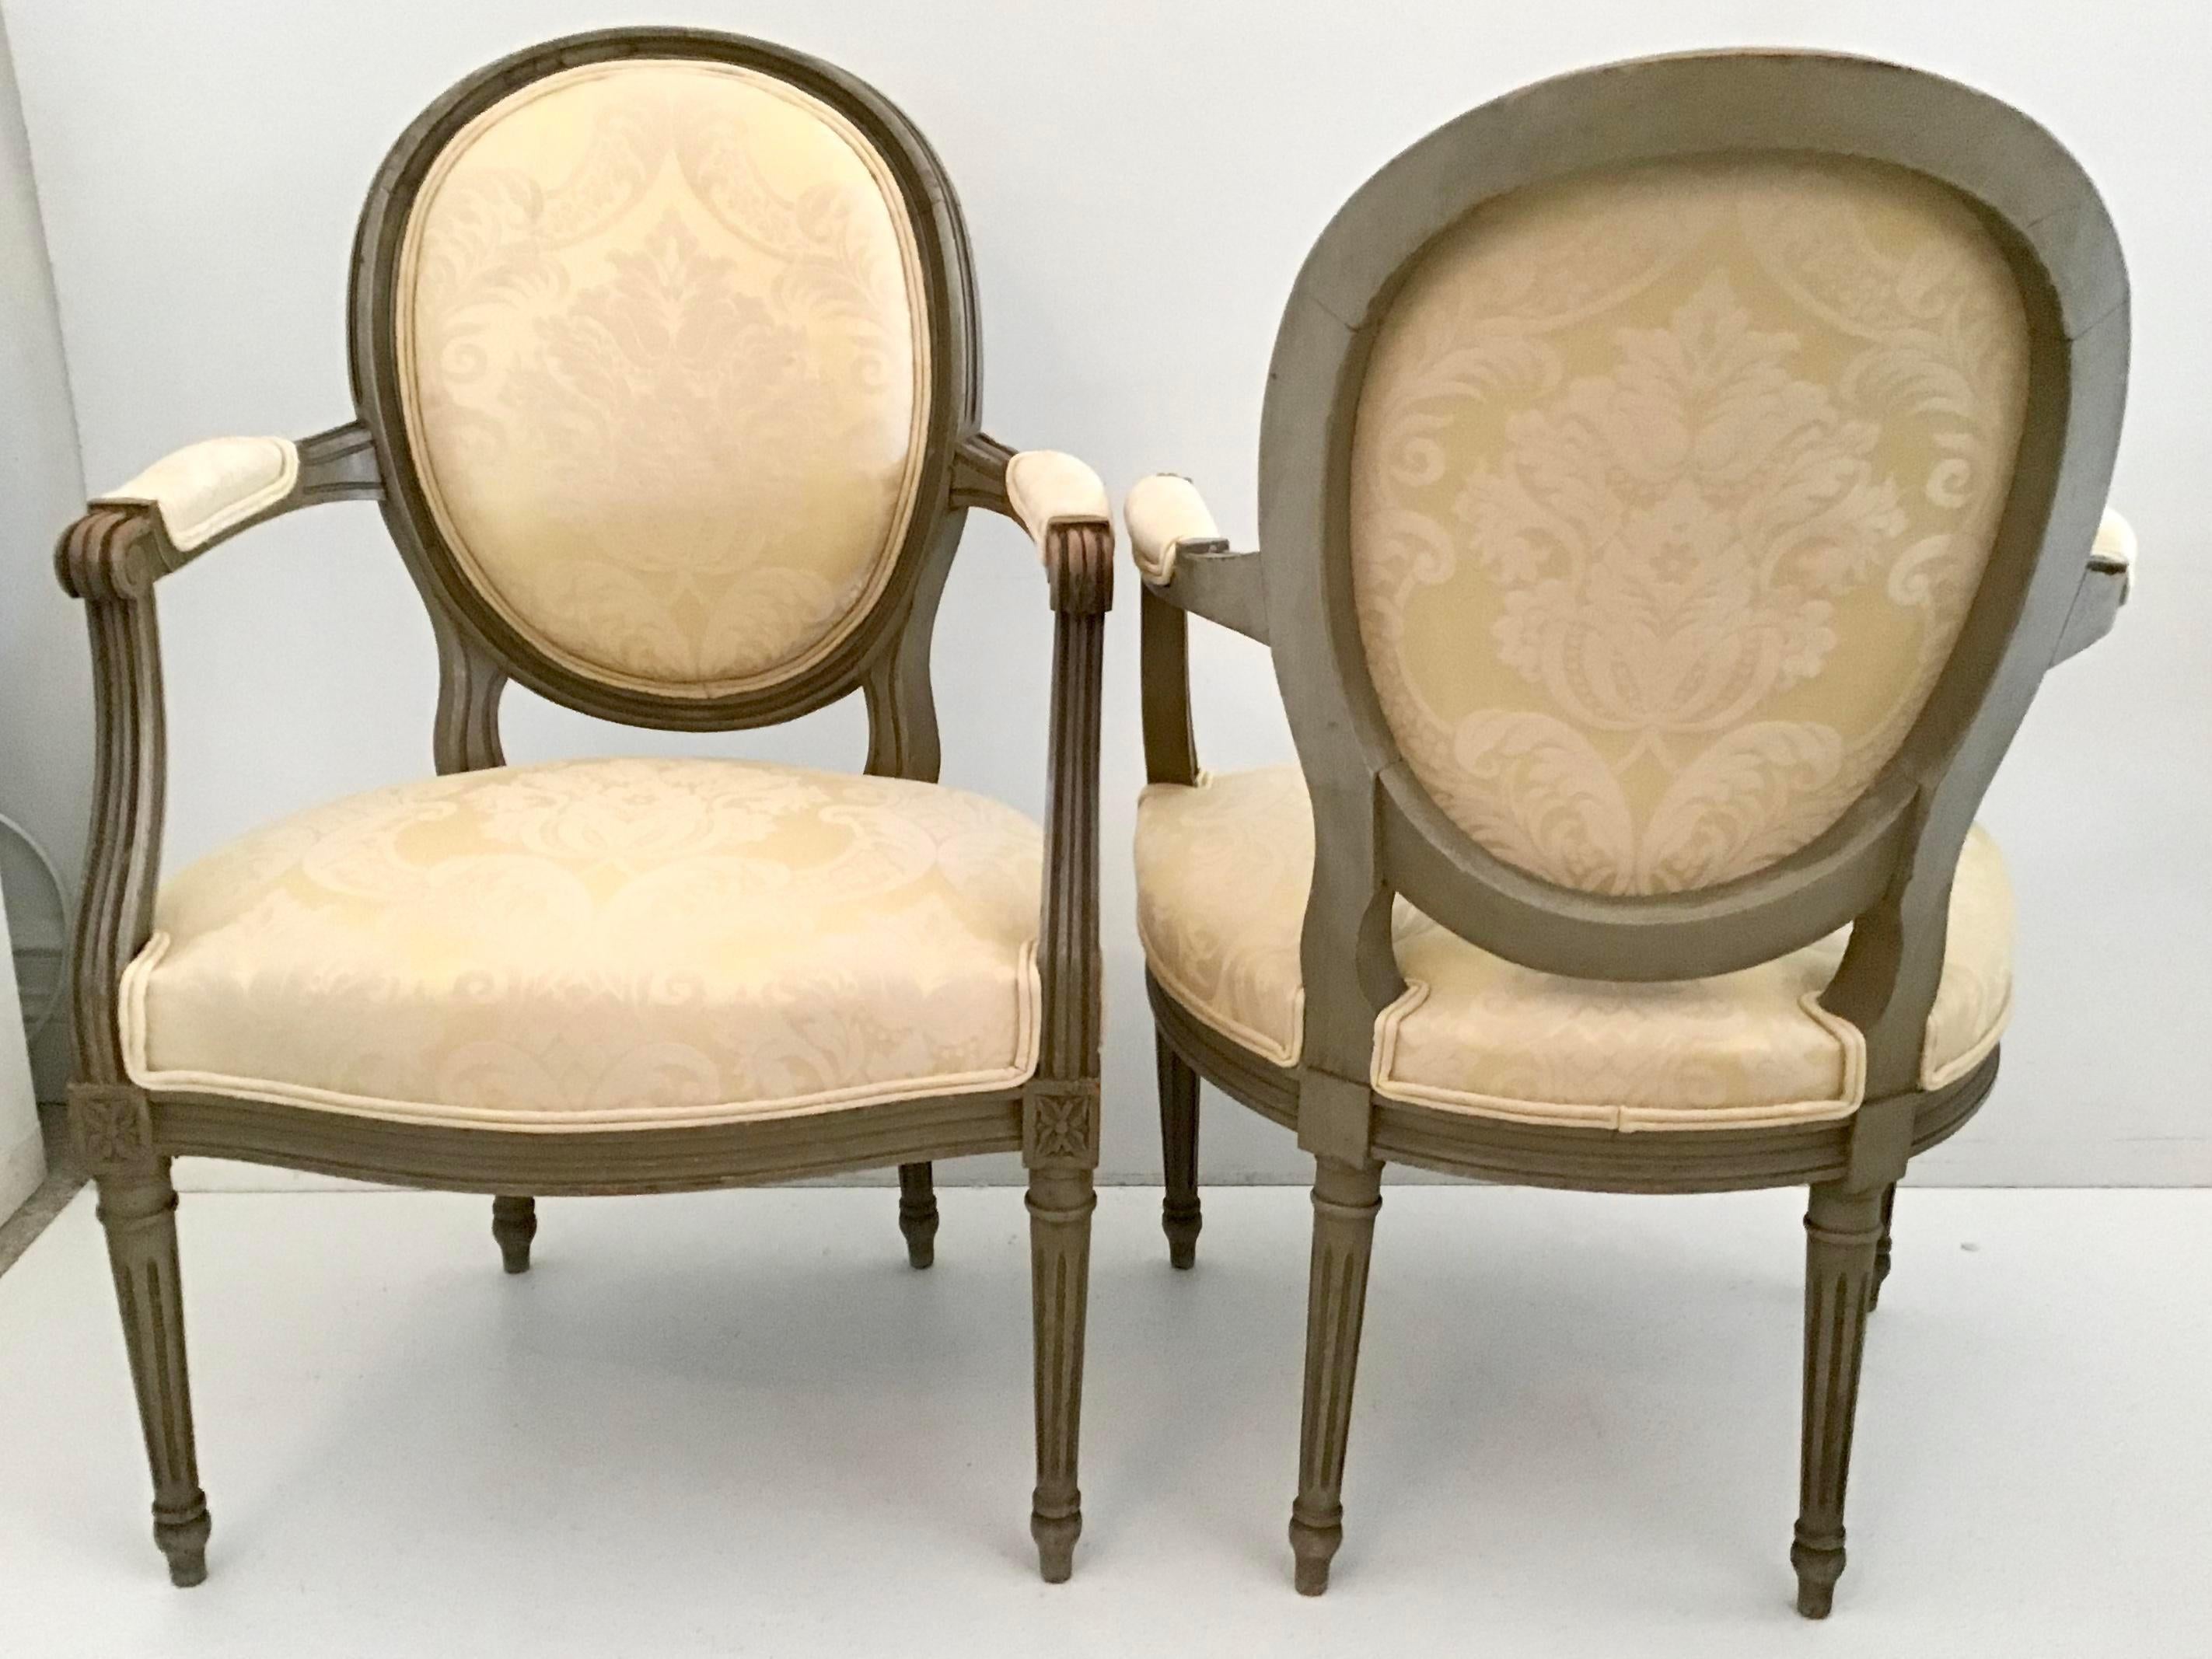 19th Century French Bronze Louis XVI Fauteuils in New Yellow Damask Upholstery, a Pair For Sale